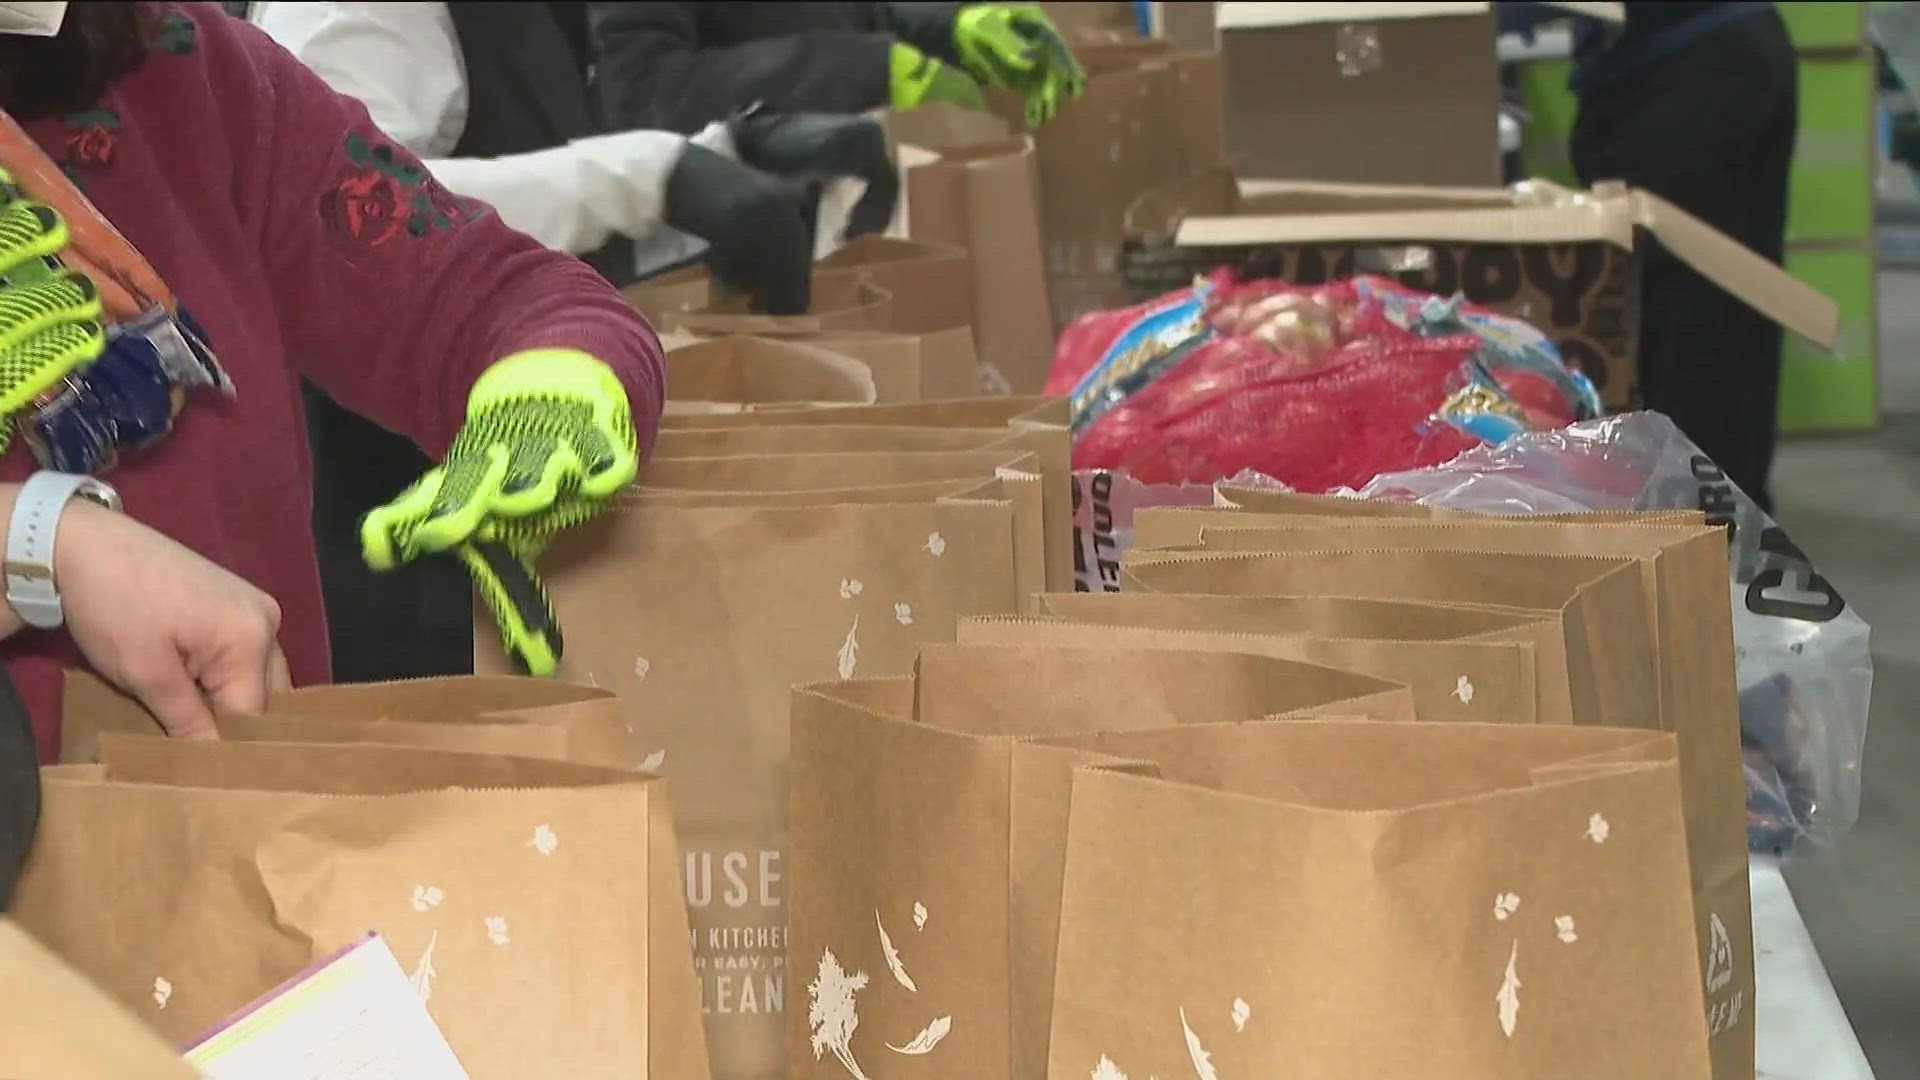 Dozens of volunteers use the food to help families who are food insecure.